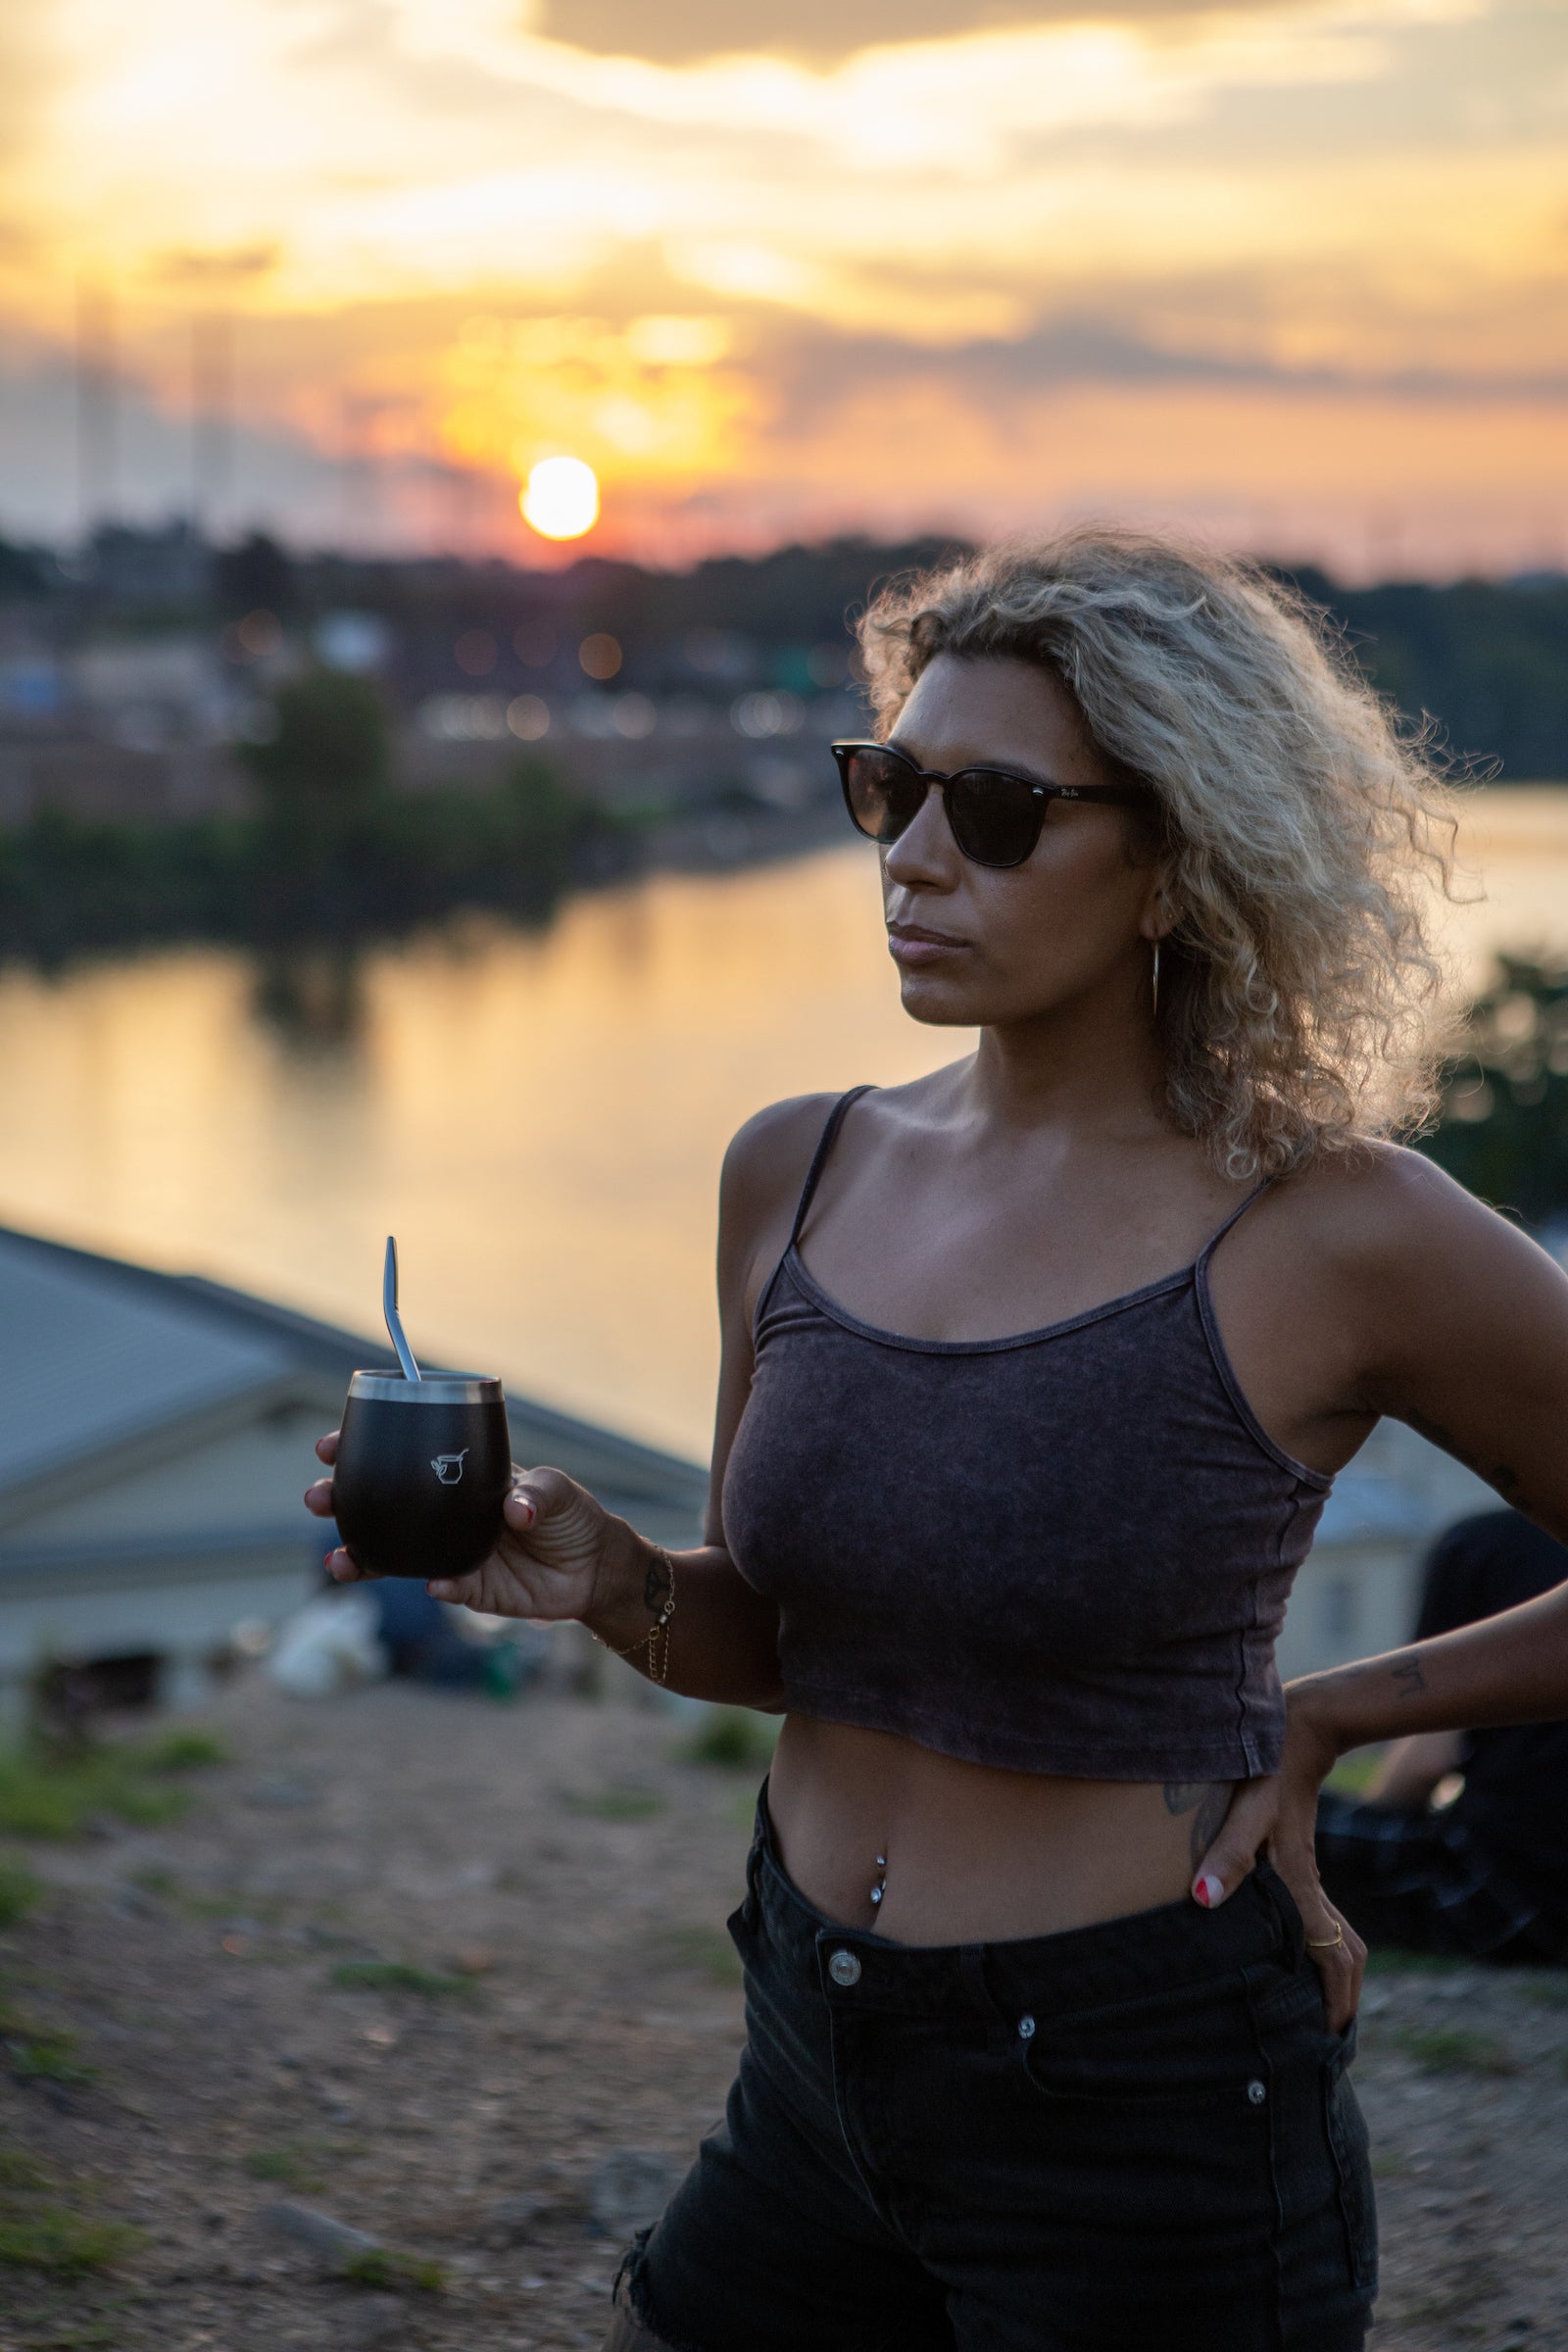 The best sunsets in Philadelphia include Yerba mate